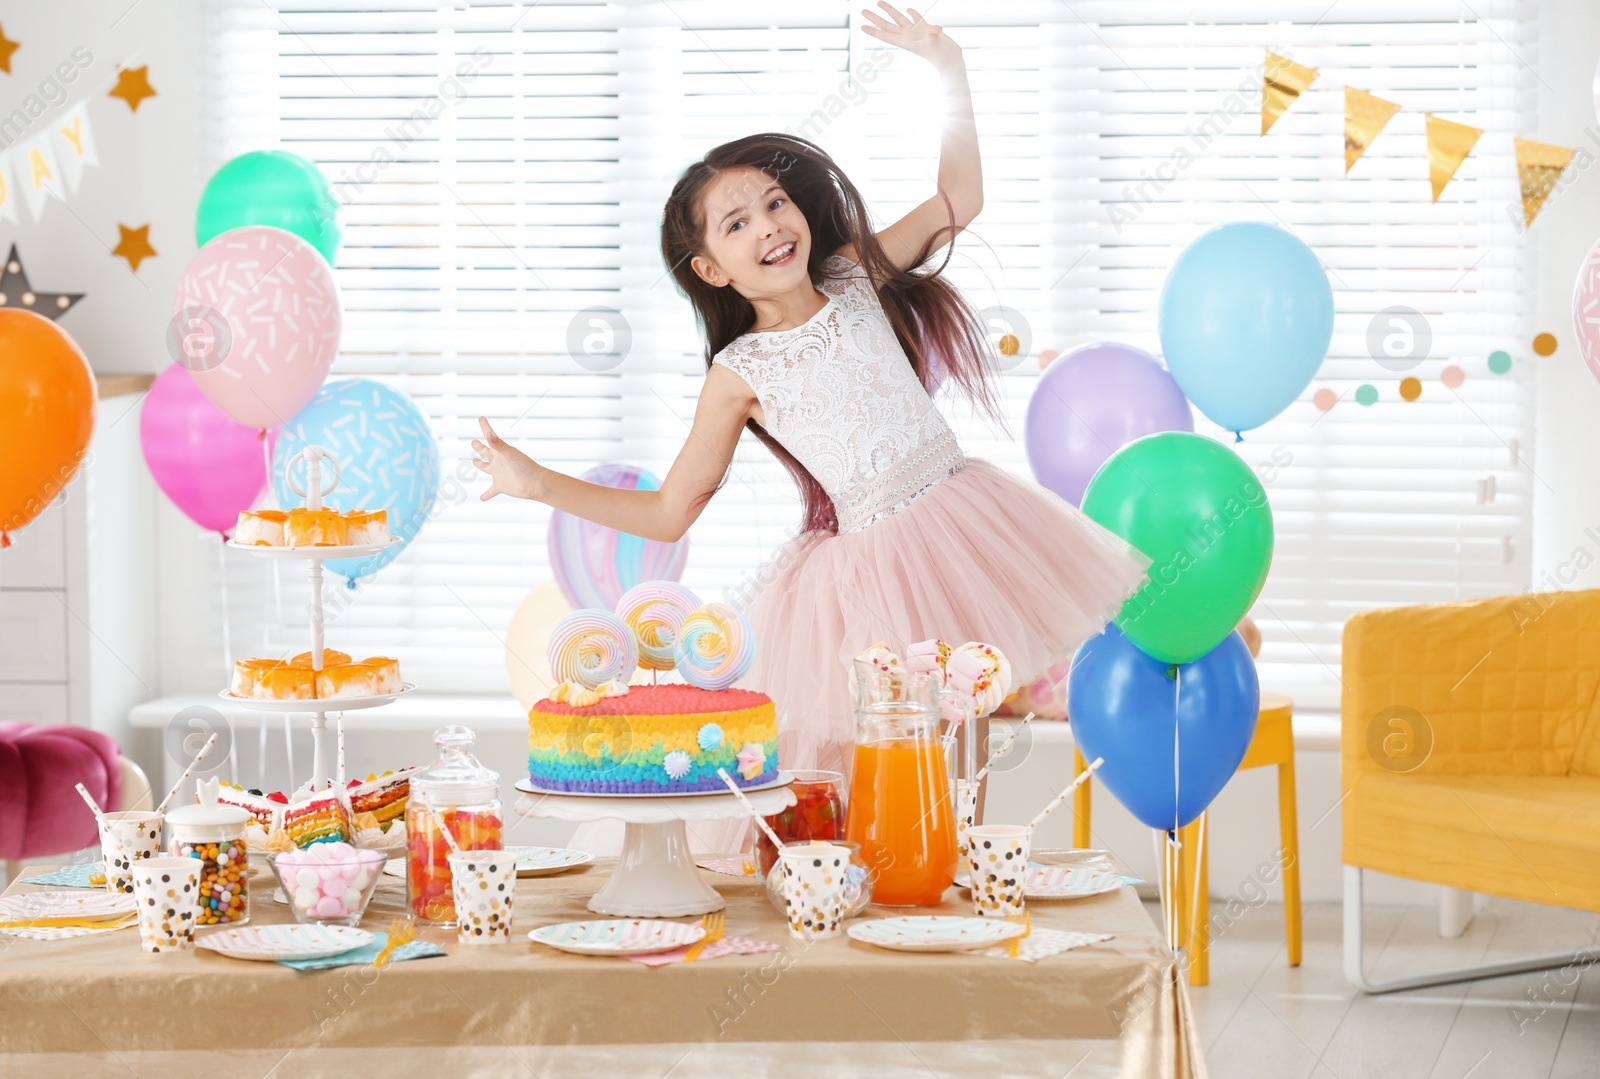 Photo of Happy girl at table with treats in room decorated for birthday party